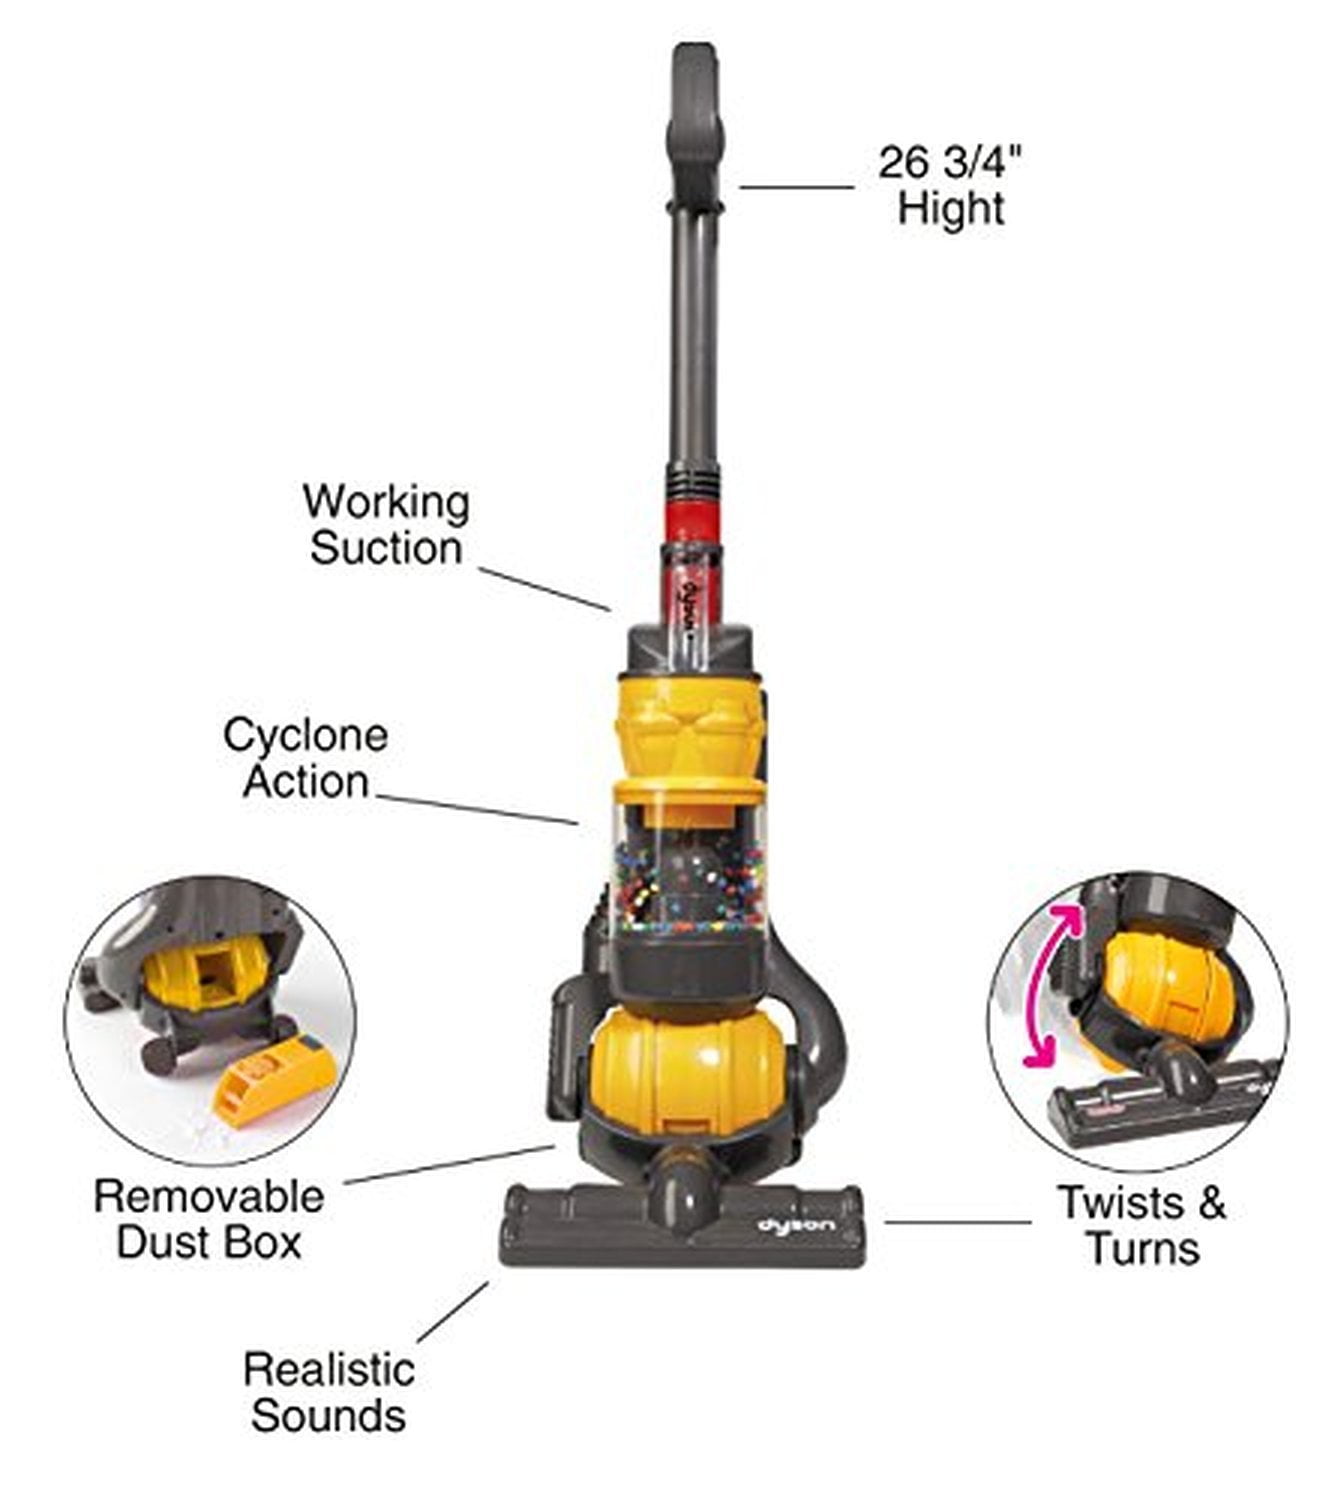 Toy Vacuum- Dyson With Real Suction and Sounds - Walmart.com